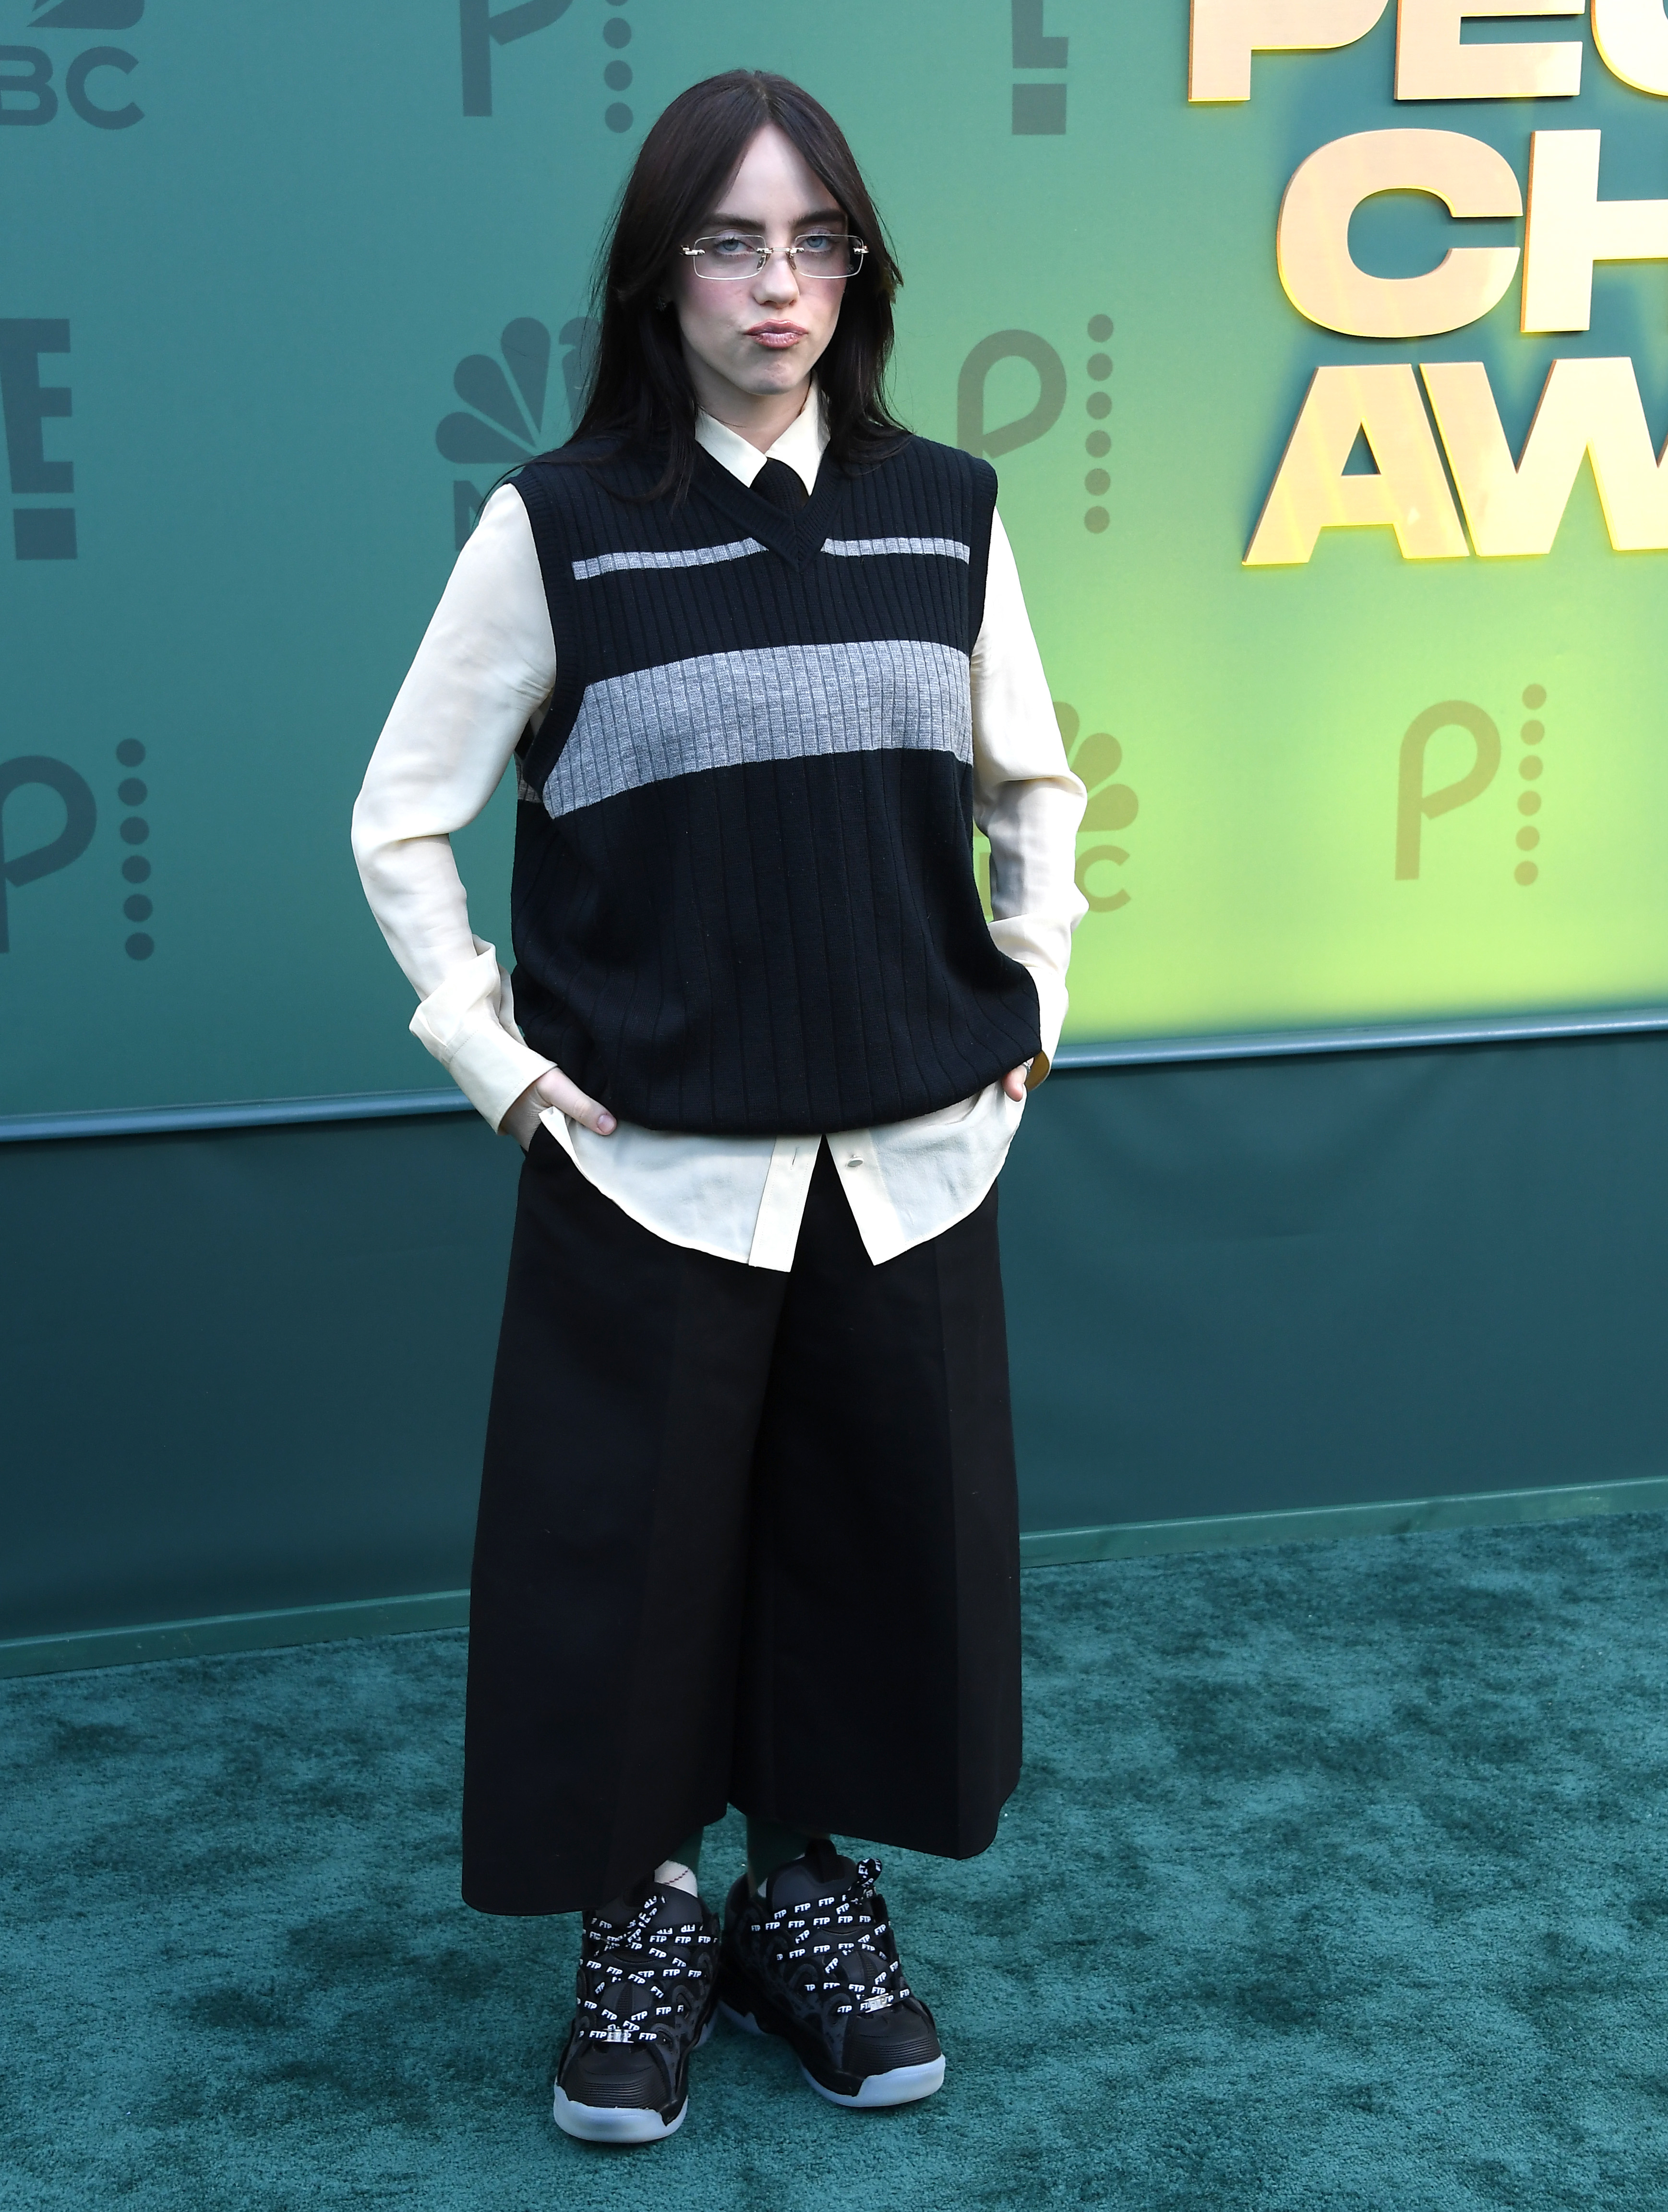 Billie Eilish standing with hands in pockets, wearing a layered oversized outfit and sneakers at an award event